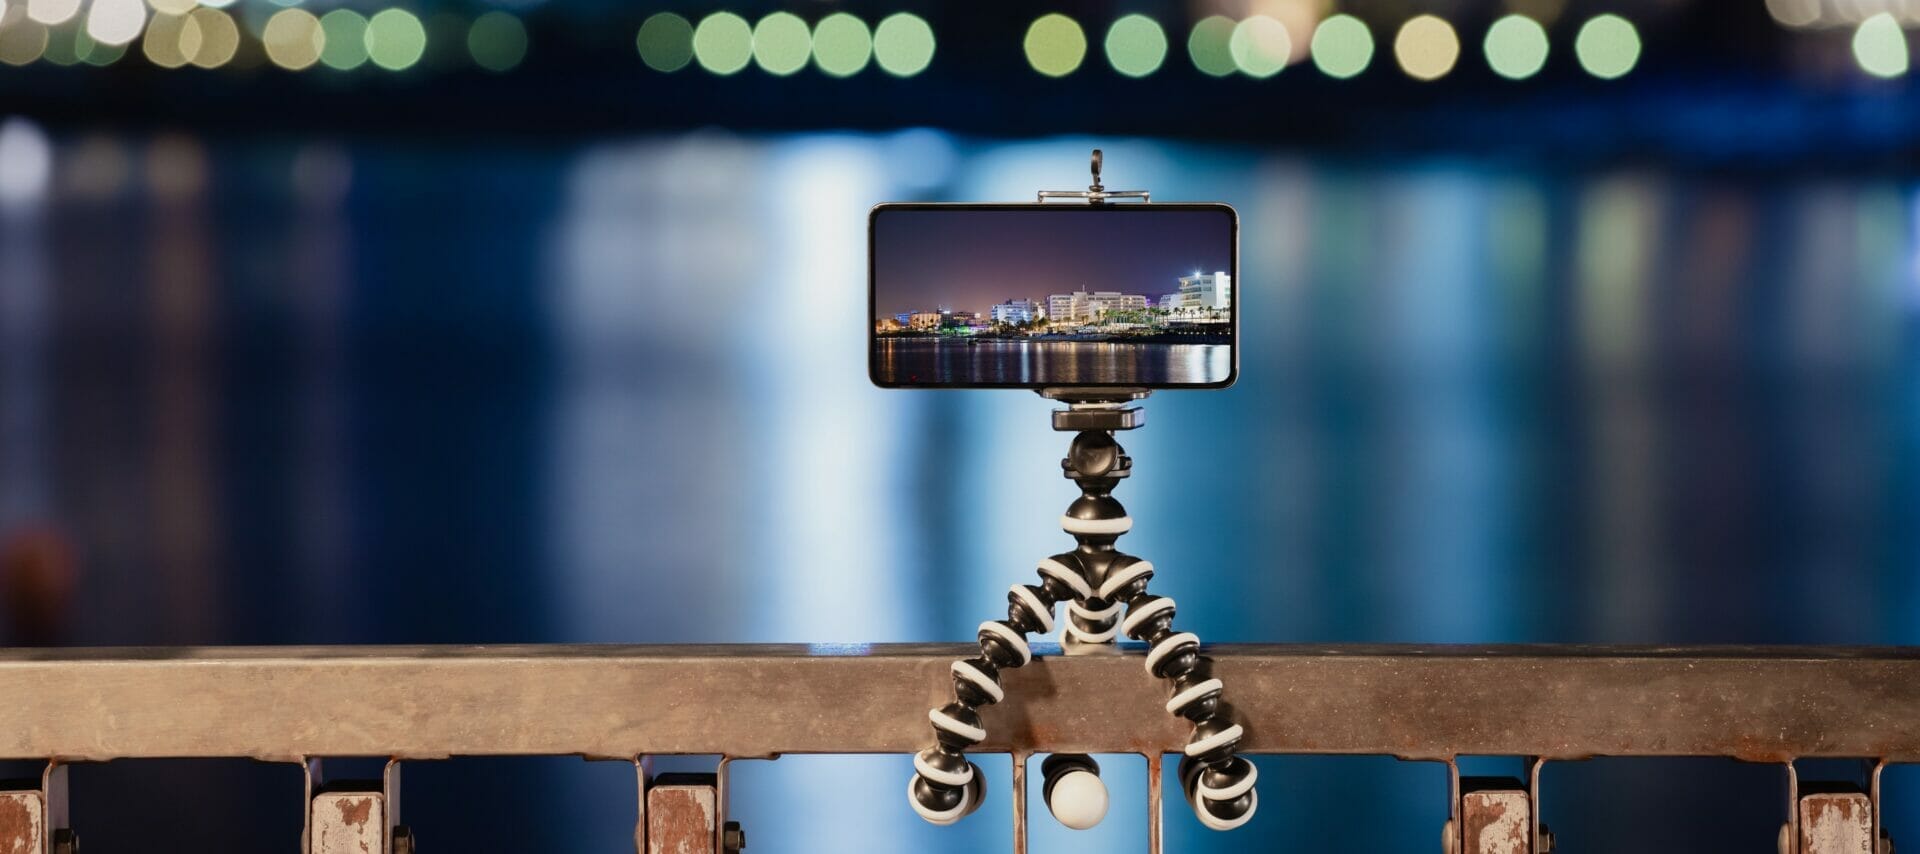 Two Minute Tuesdays - Table Top Tripods. Photo of a smart phone attached to a gorilla tripod twisted around a fence railing taking a photo at night